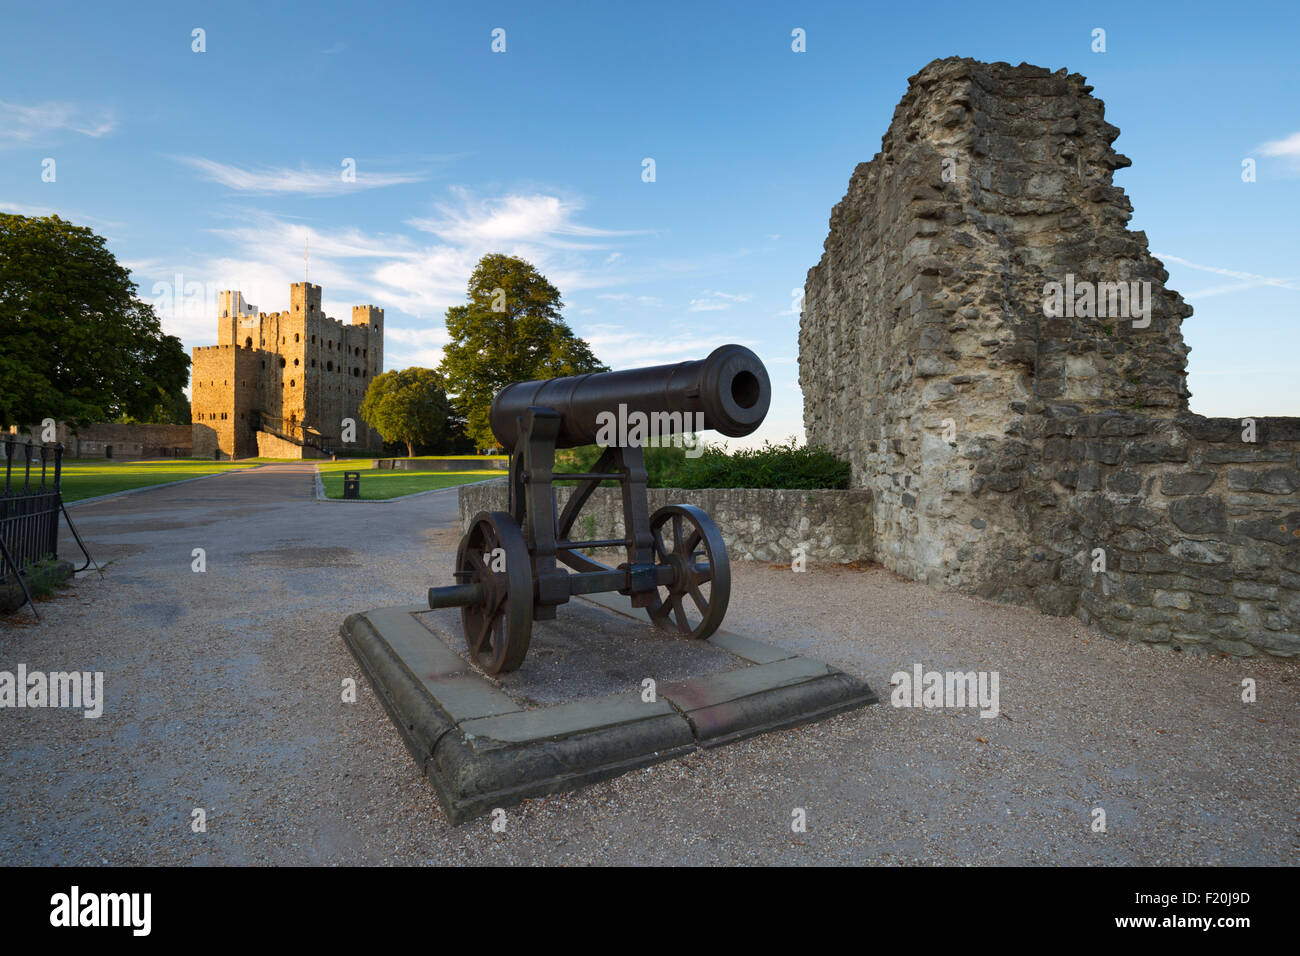 Rochester Castle and cannon, Rochester, Kent, England, United Kingdom, Europe Stock Photo